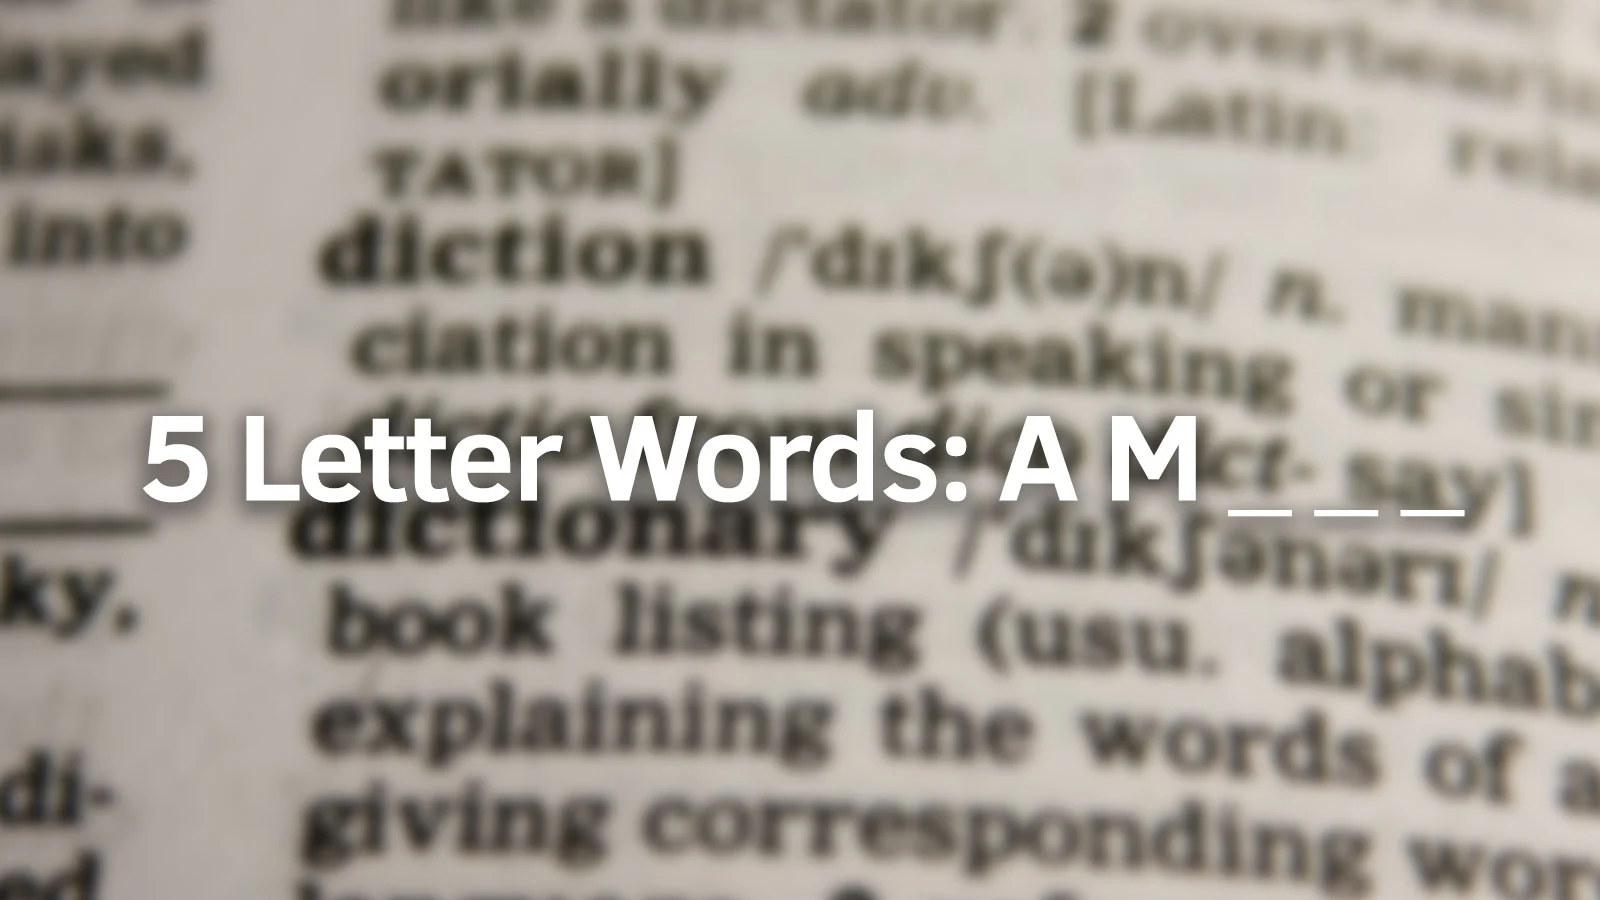 Wordle: 5-Letter Words That Start with AM